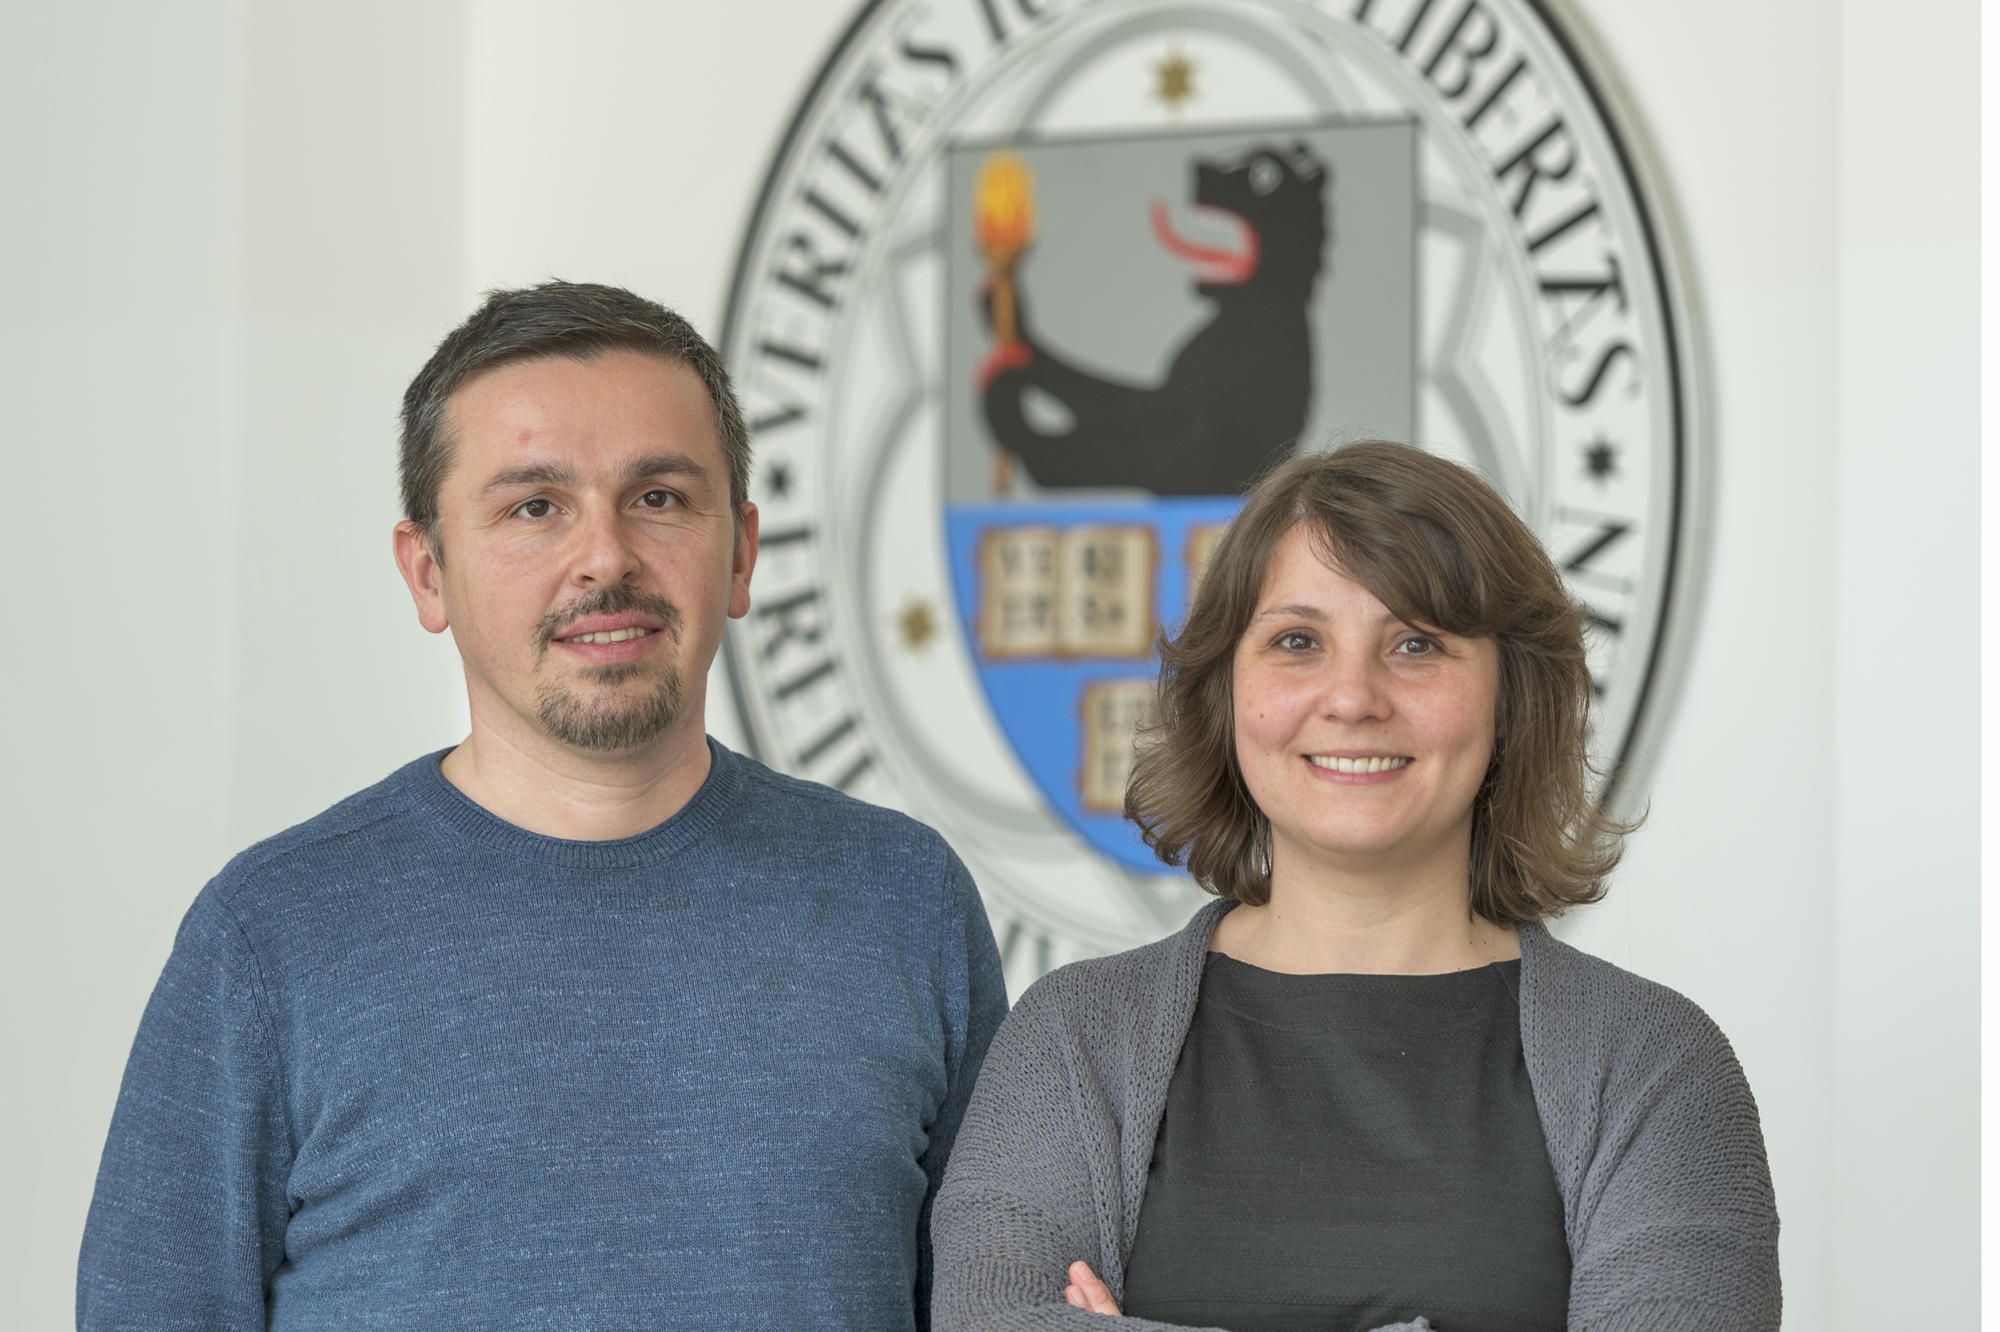 Arrived in Berlin: Esra Demir-Gürsel, lawyer, and Kivanç Ersoy, mathematician.